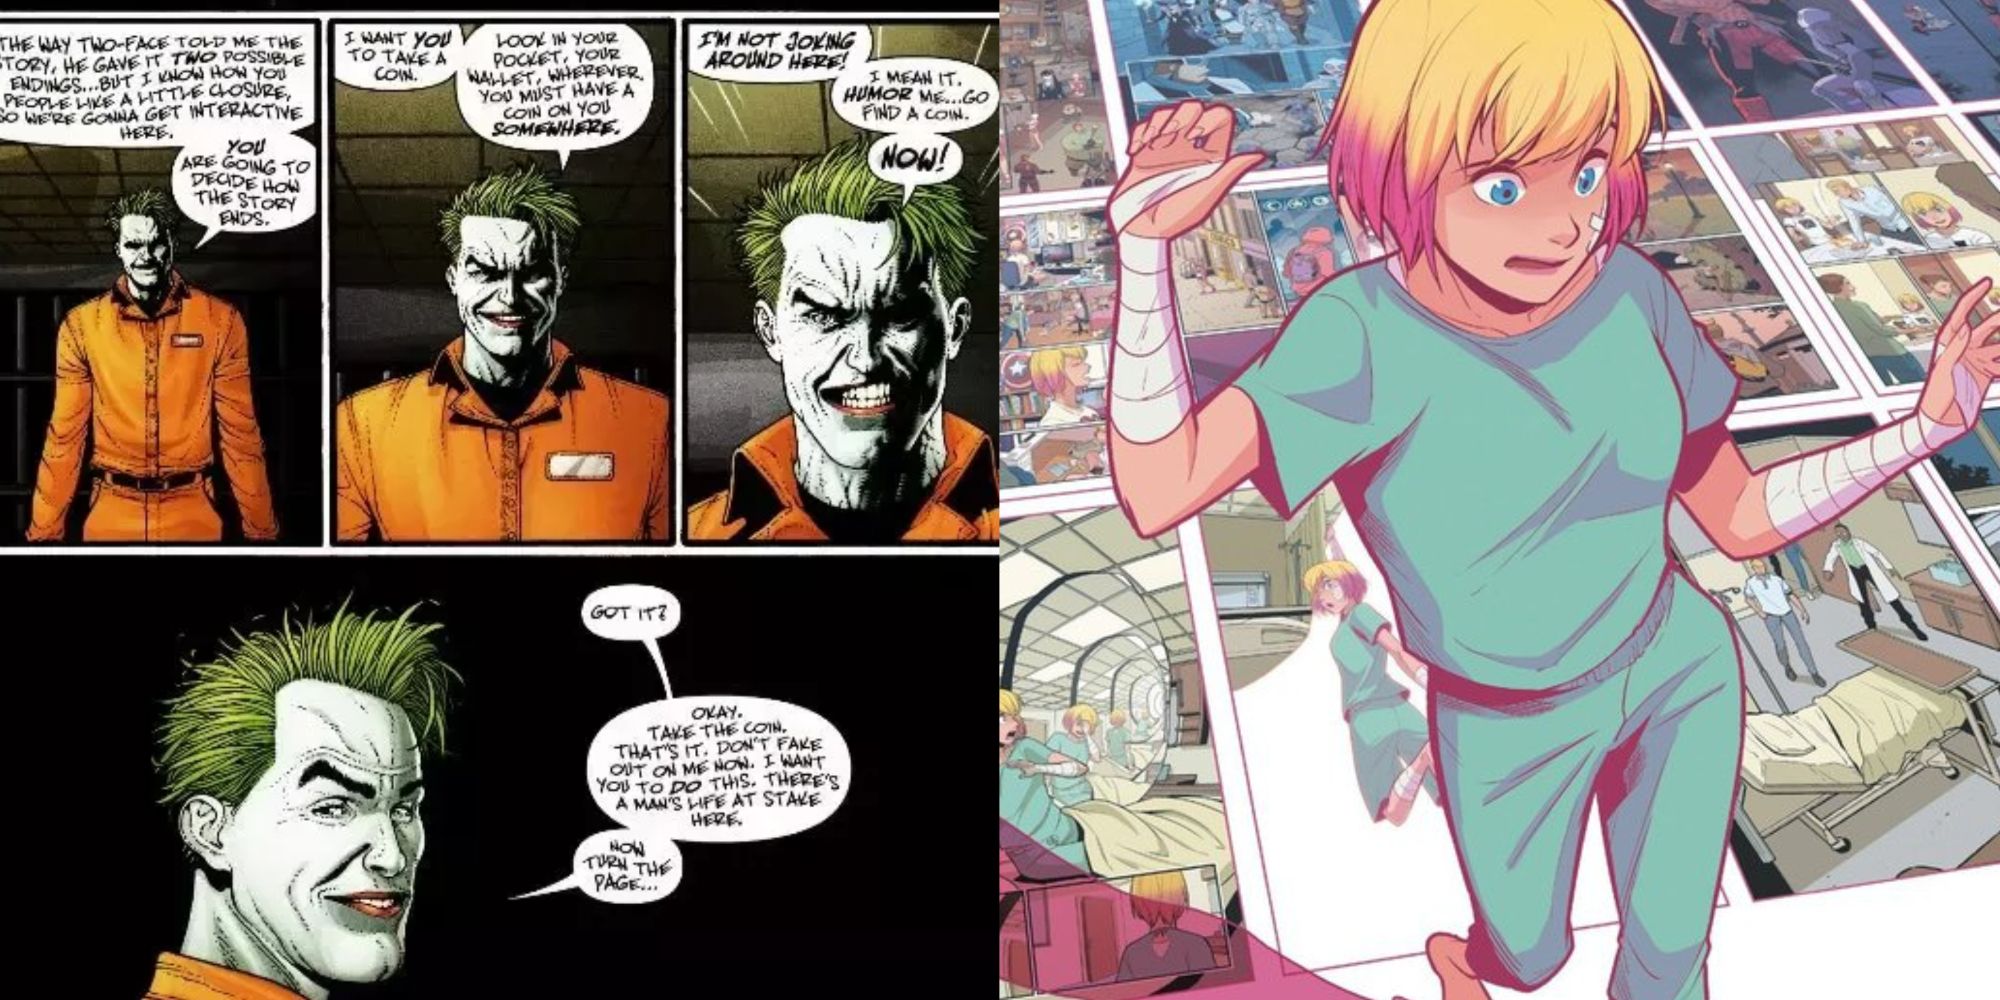 Split image showing the Joker and Gwenpool breaking the fourth wall